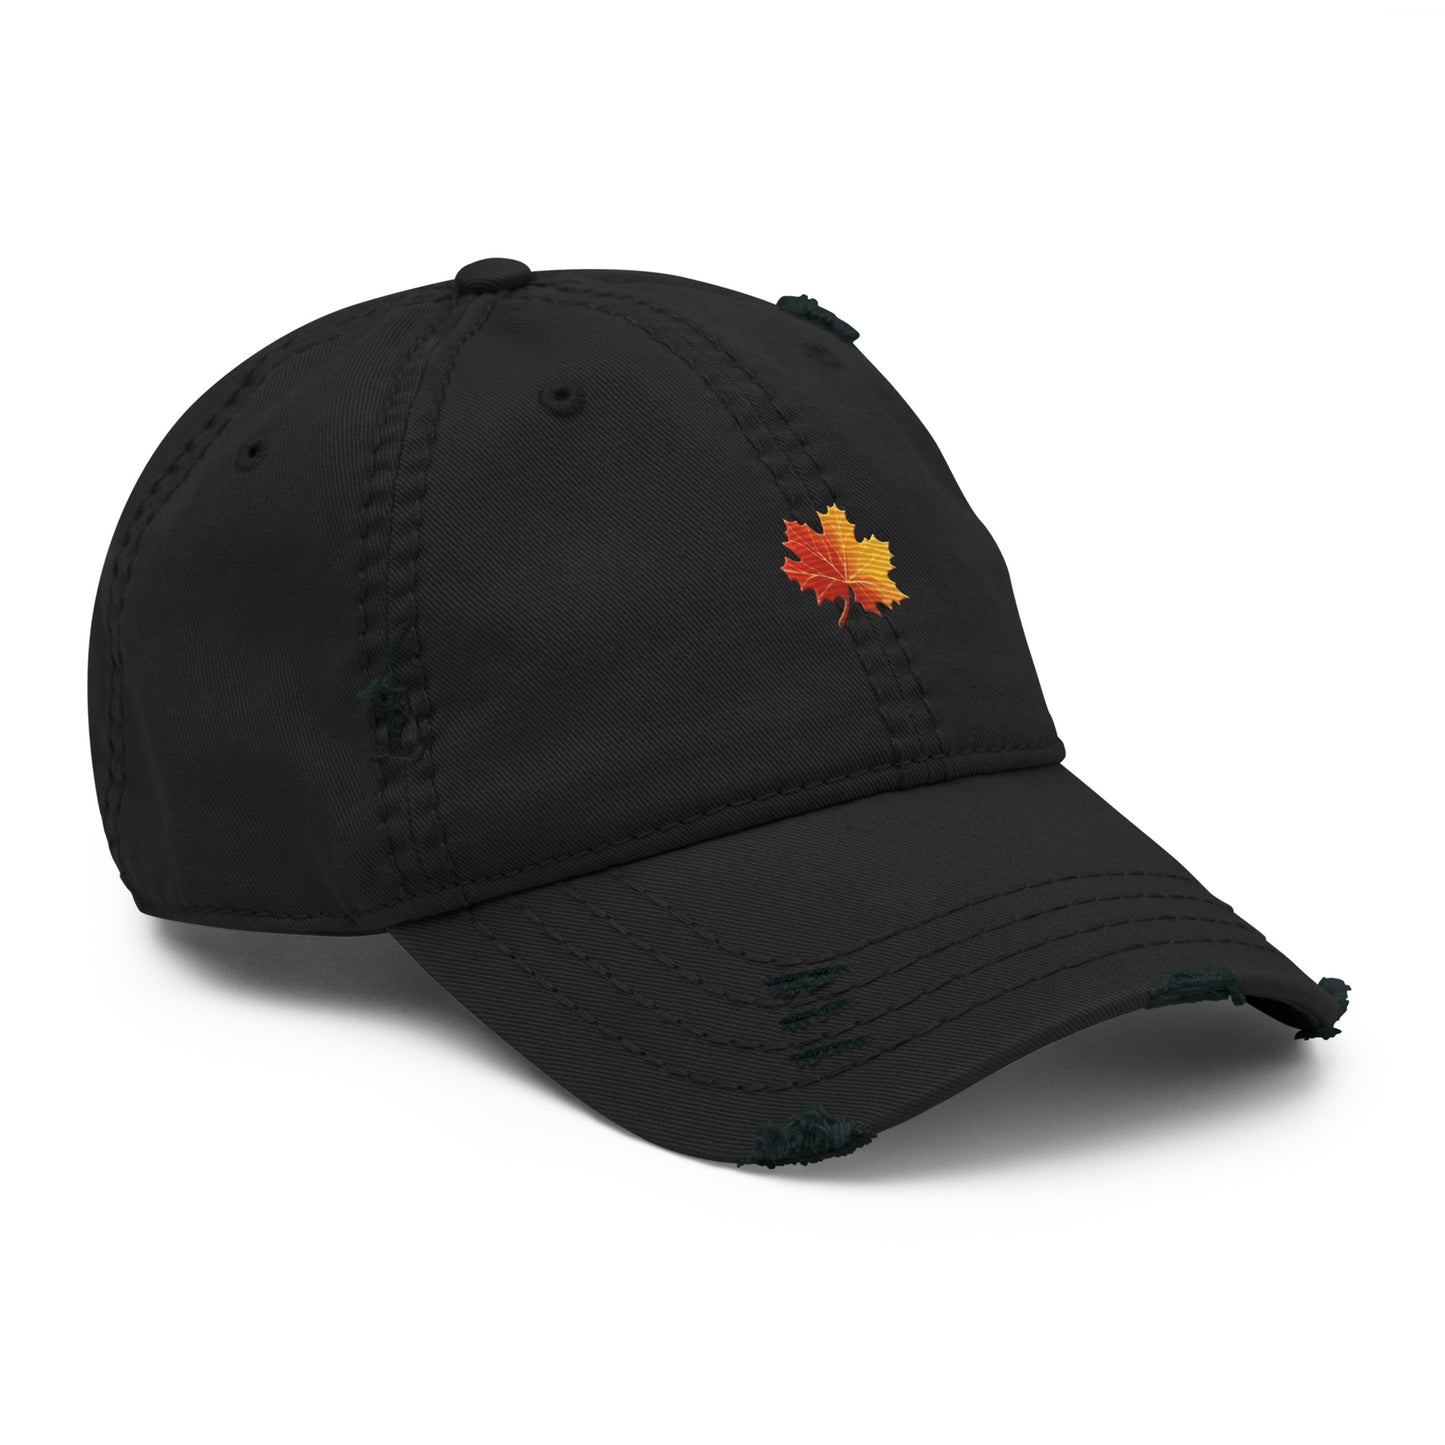 Trucker Cap with Fall Leaves Symbol